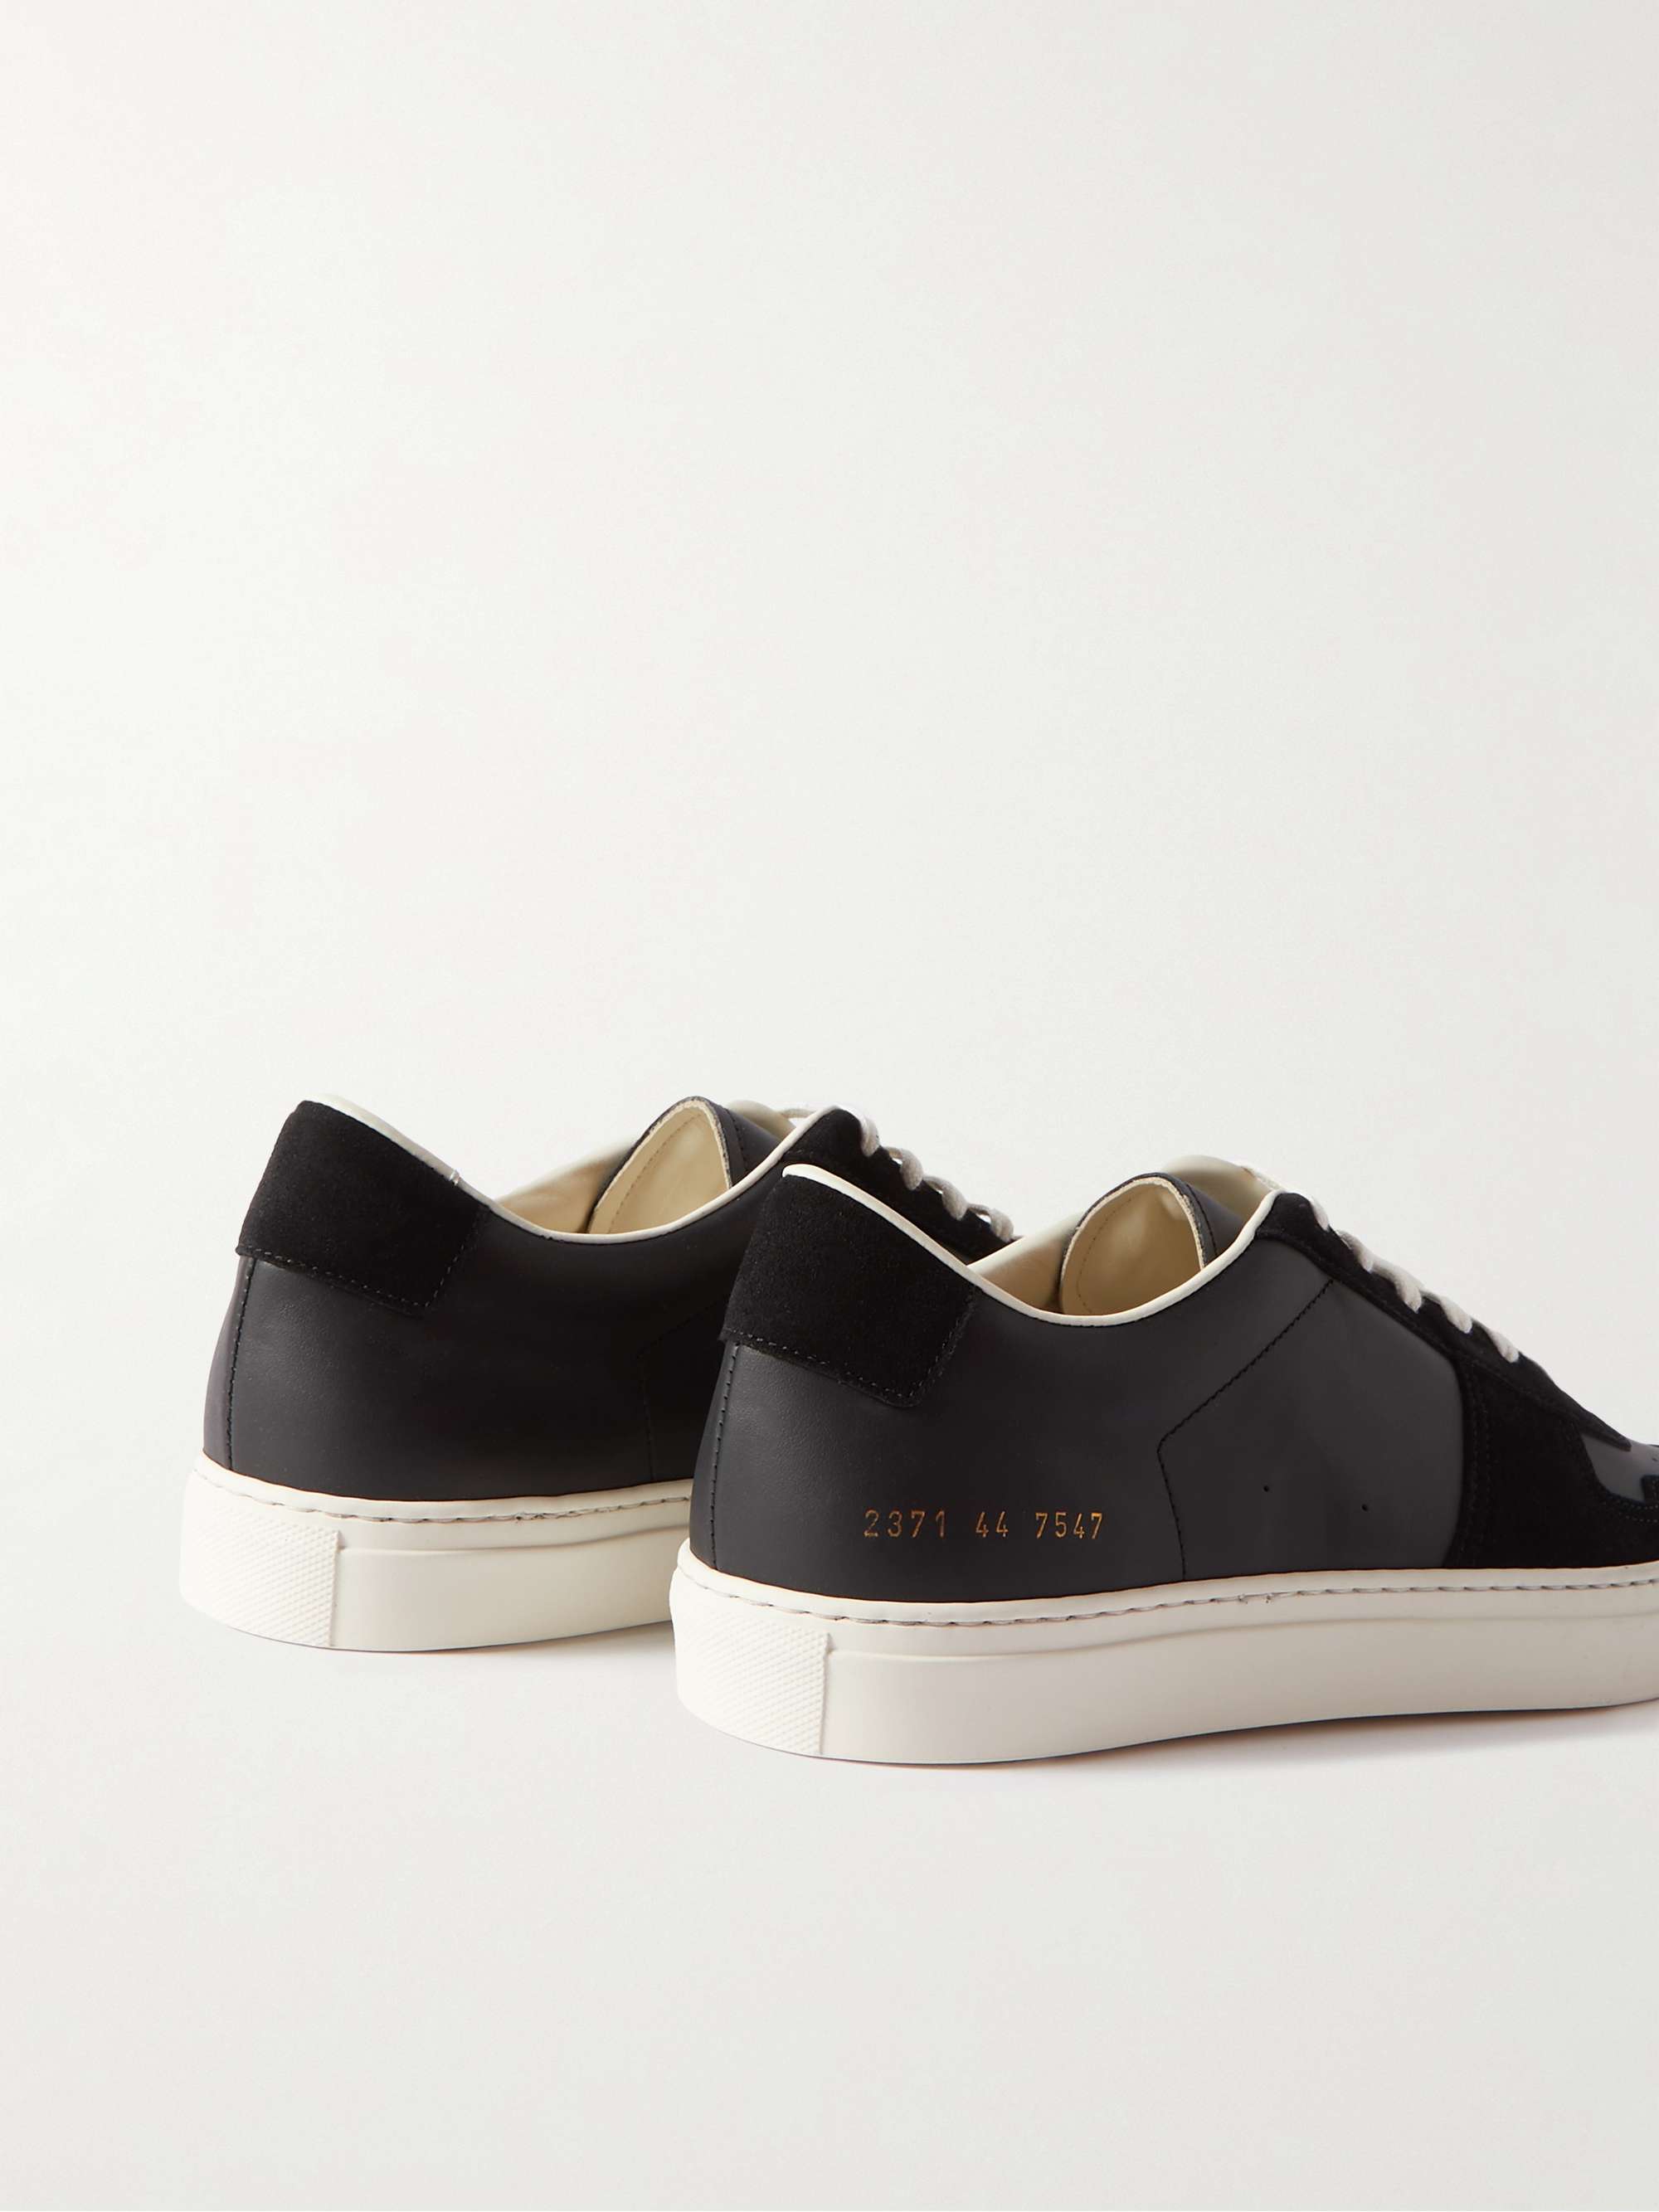 COMMON PROJECTS Bball Suede-Trimmed Leather Sneakers